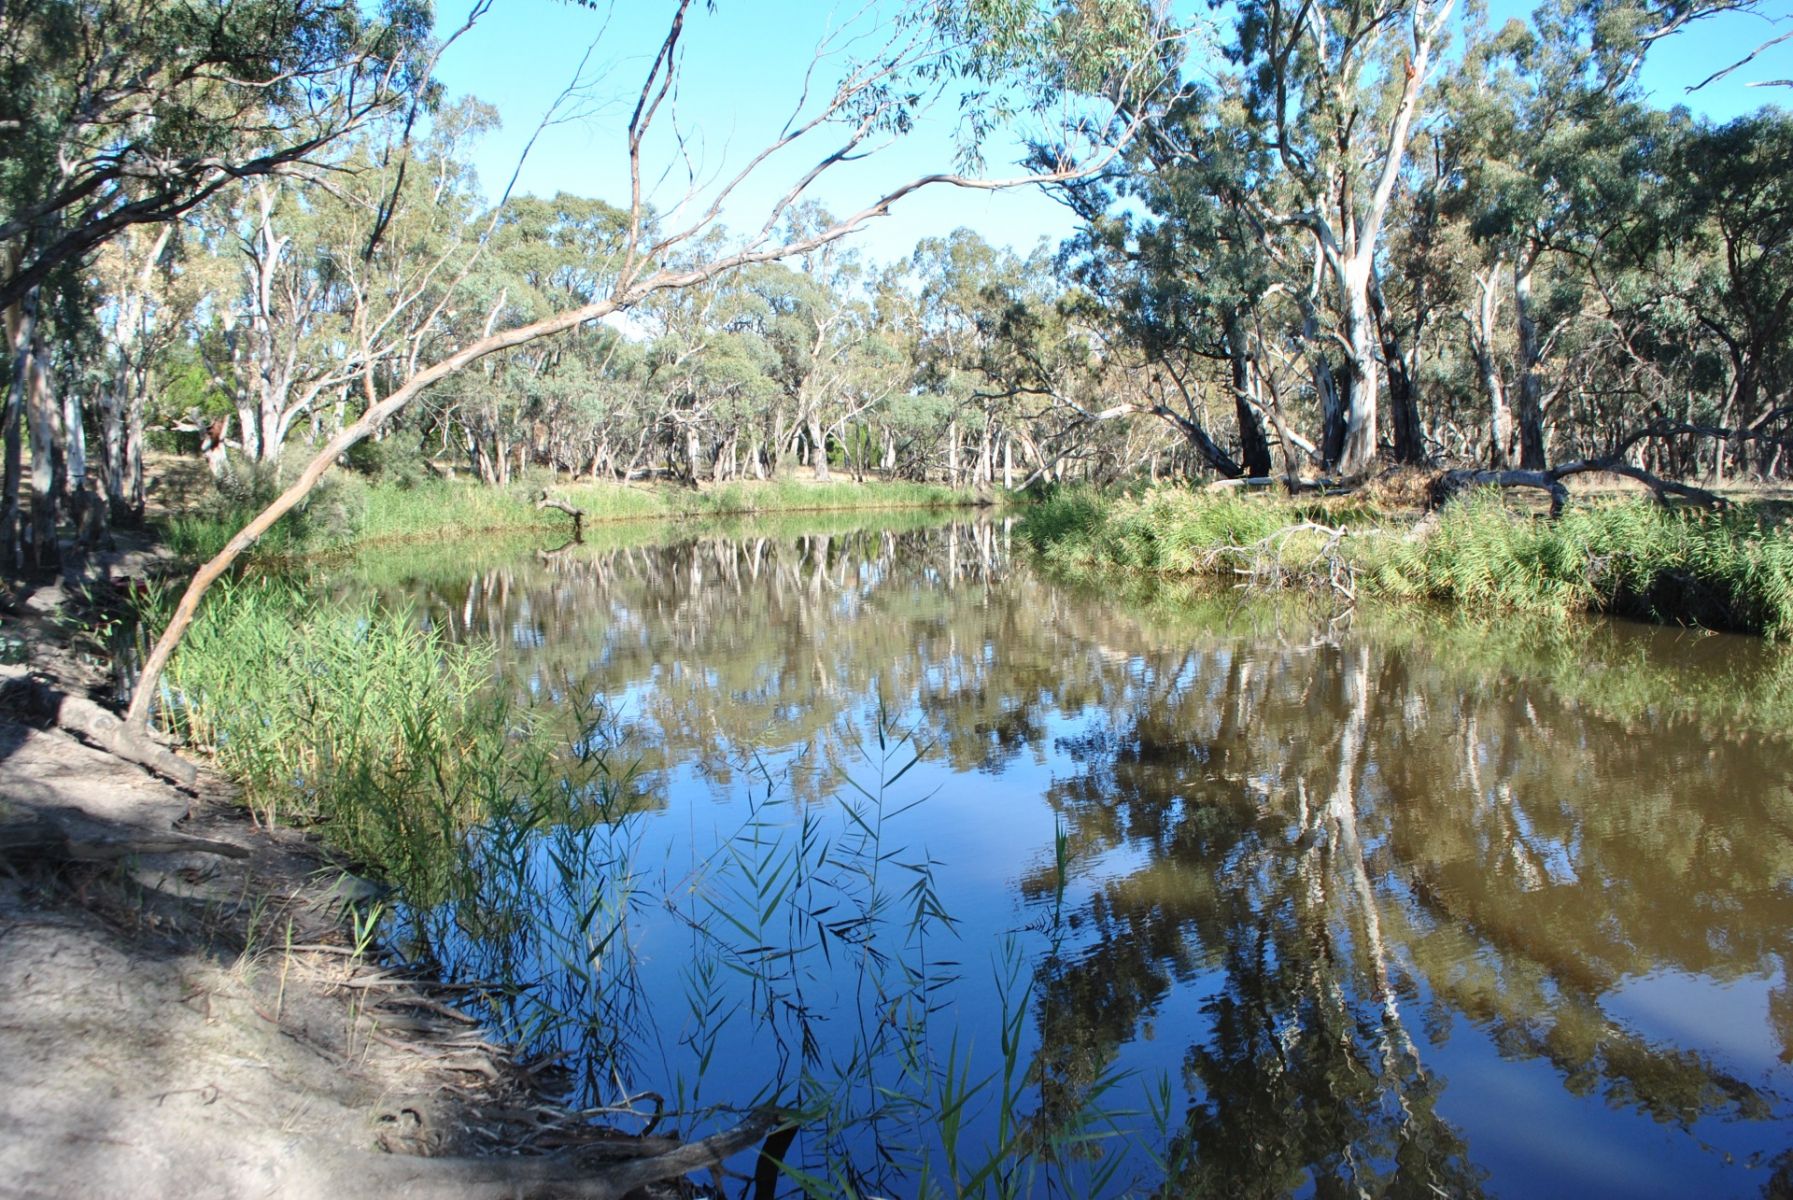 A calm river with trees on each bank